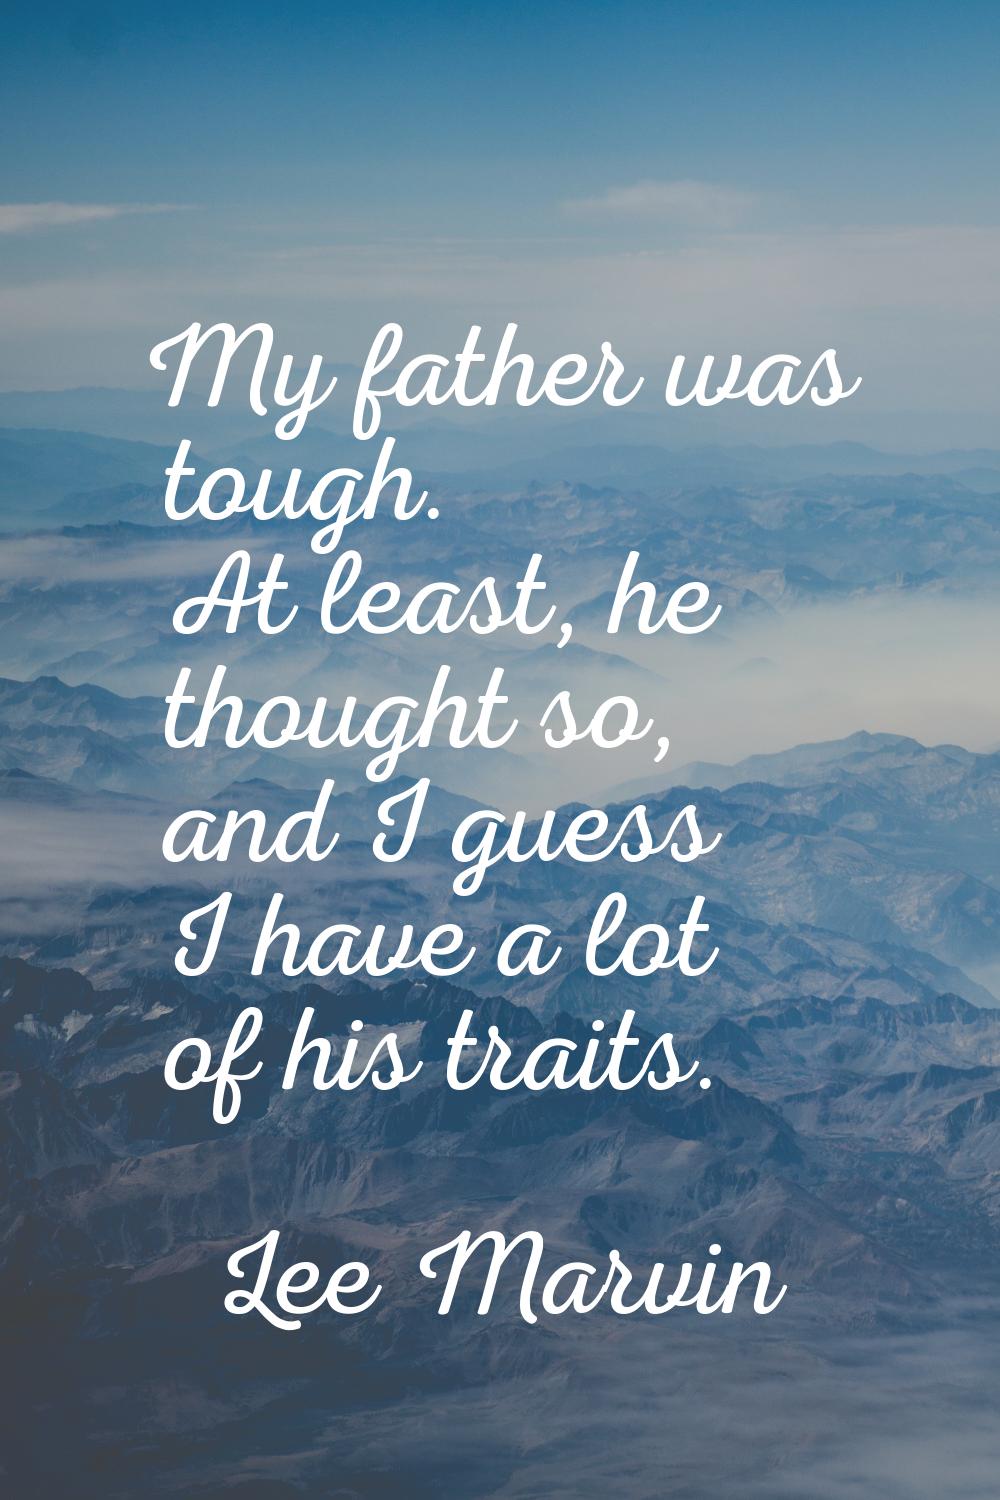 My father was tough. At least, he thought so, and I guess I have a lot of his traits.